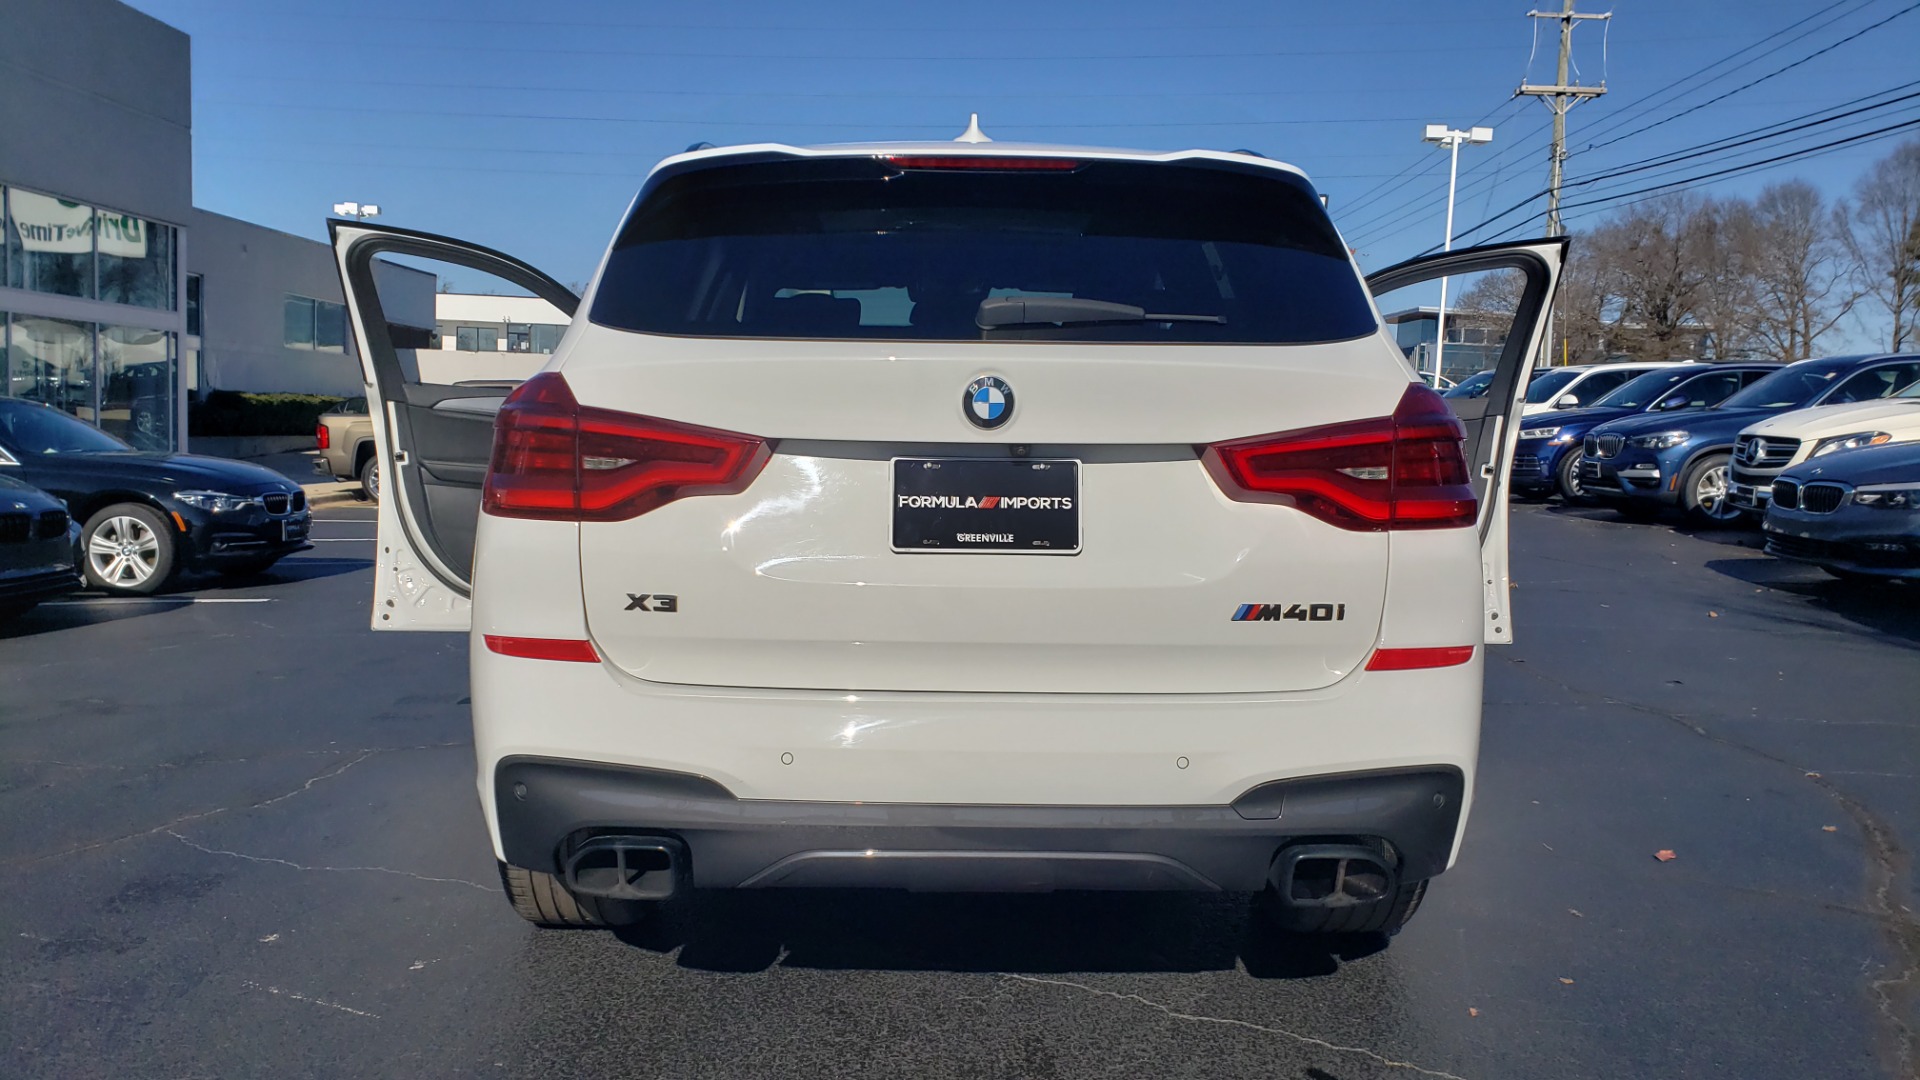 Used 2019 BMW X3 M40I SPORT / NAV / SUNROOF / DRVR ASST / PARK ASST / HTD STS / REARVIEW for sale $53,495 at Formula Imports in Charlotte NC 28227 29